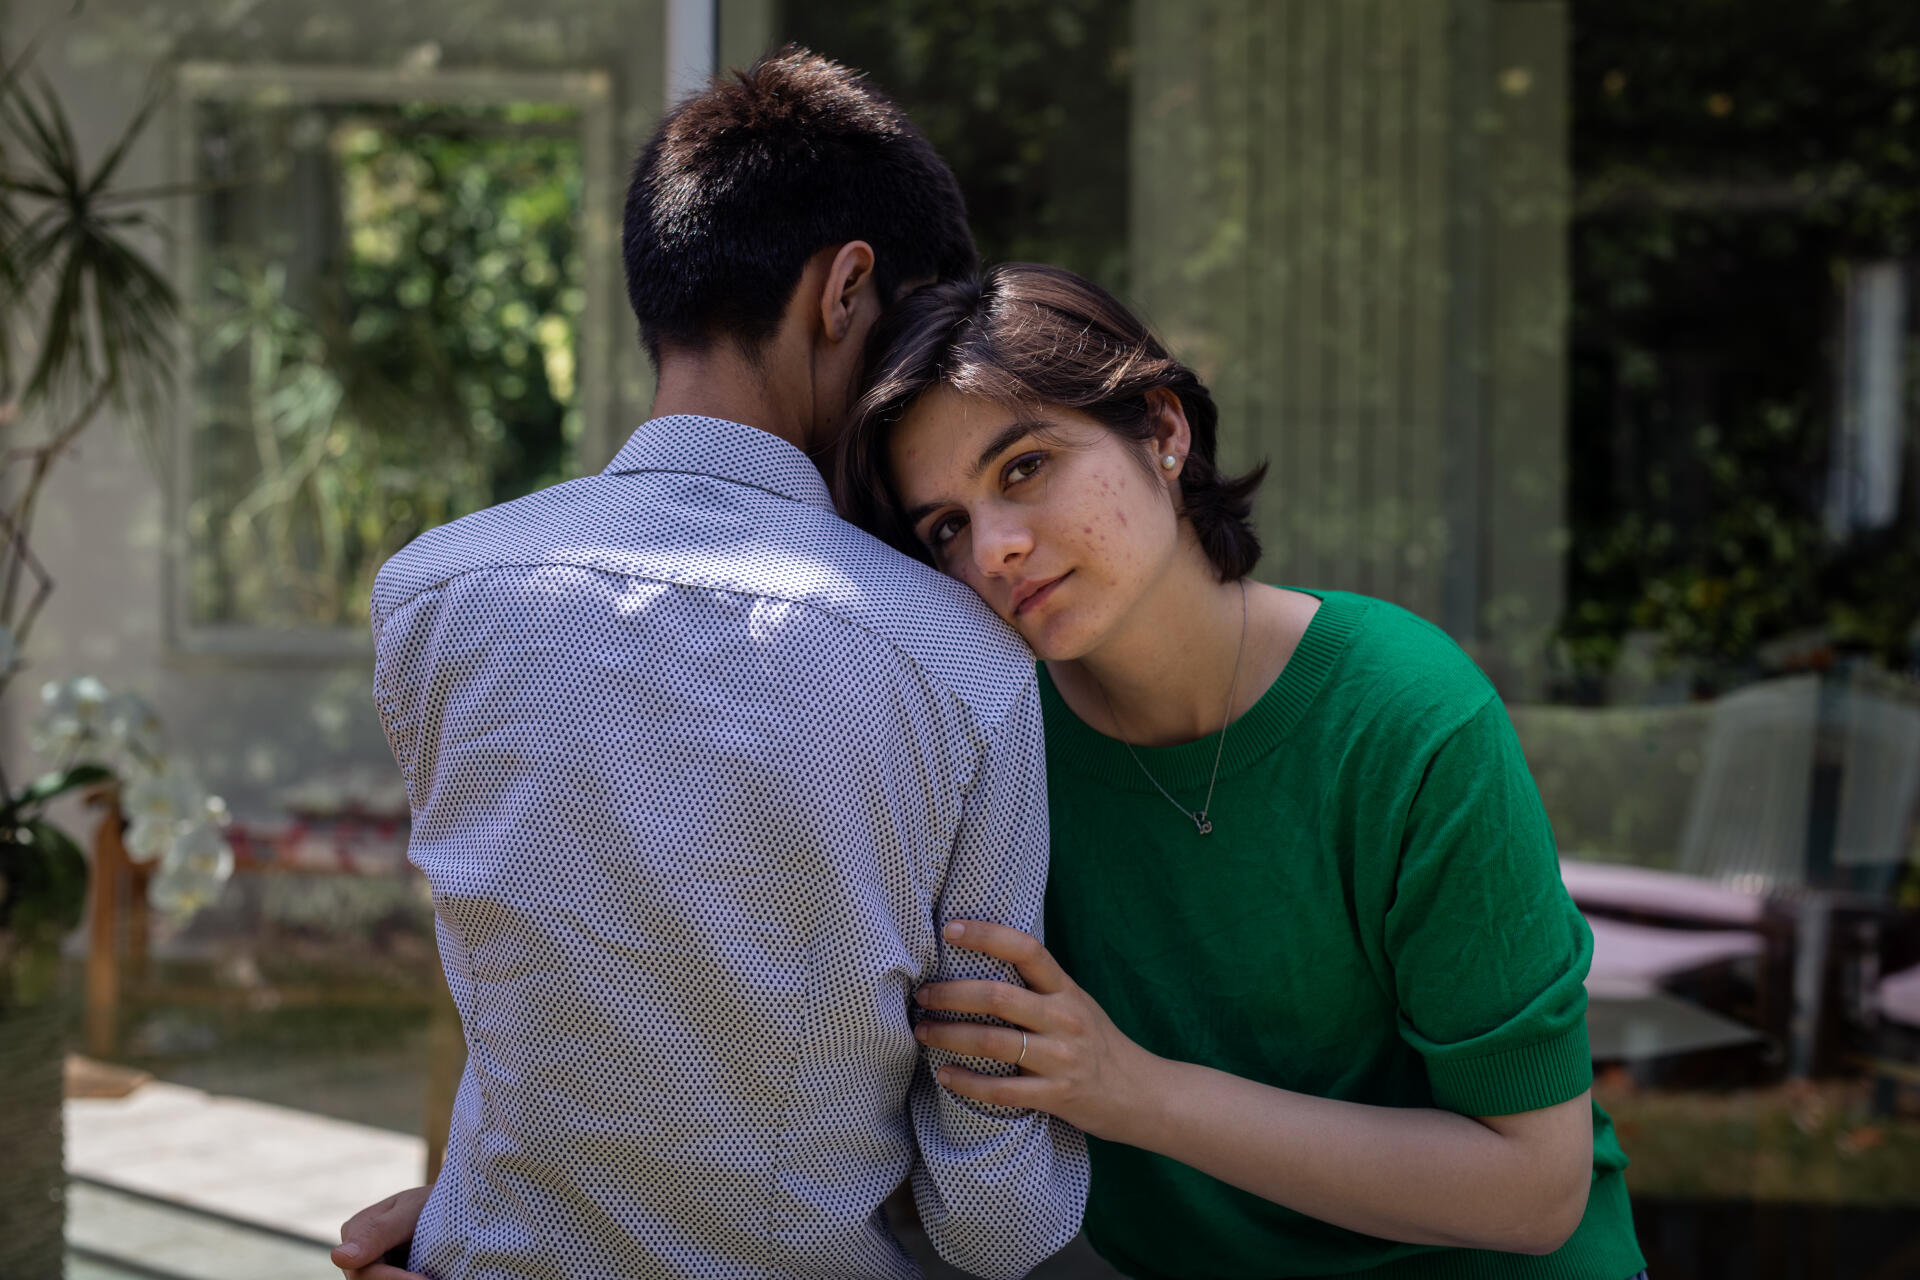 Tasnim Hakim and her husband, Ramin Mazhar, Afghan poet, in the garden of the house where they are staying in the Paris suburbs, June 25, 2022.